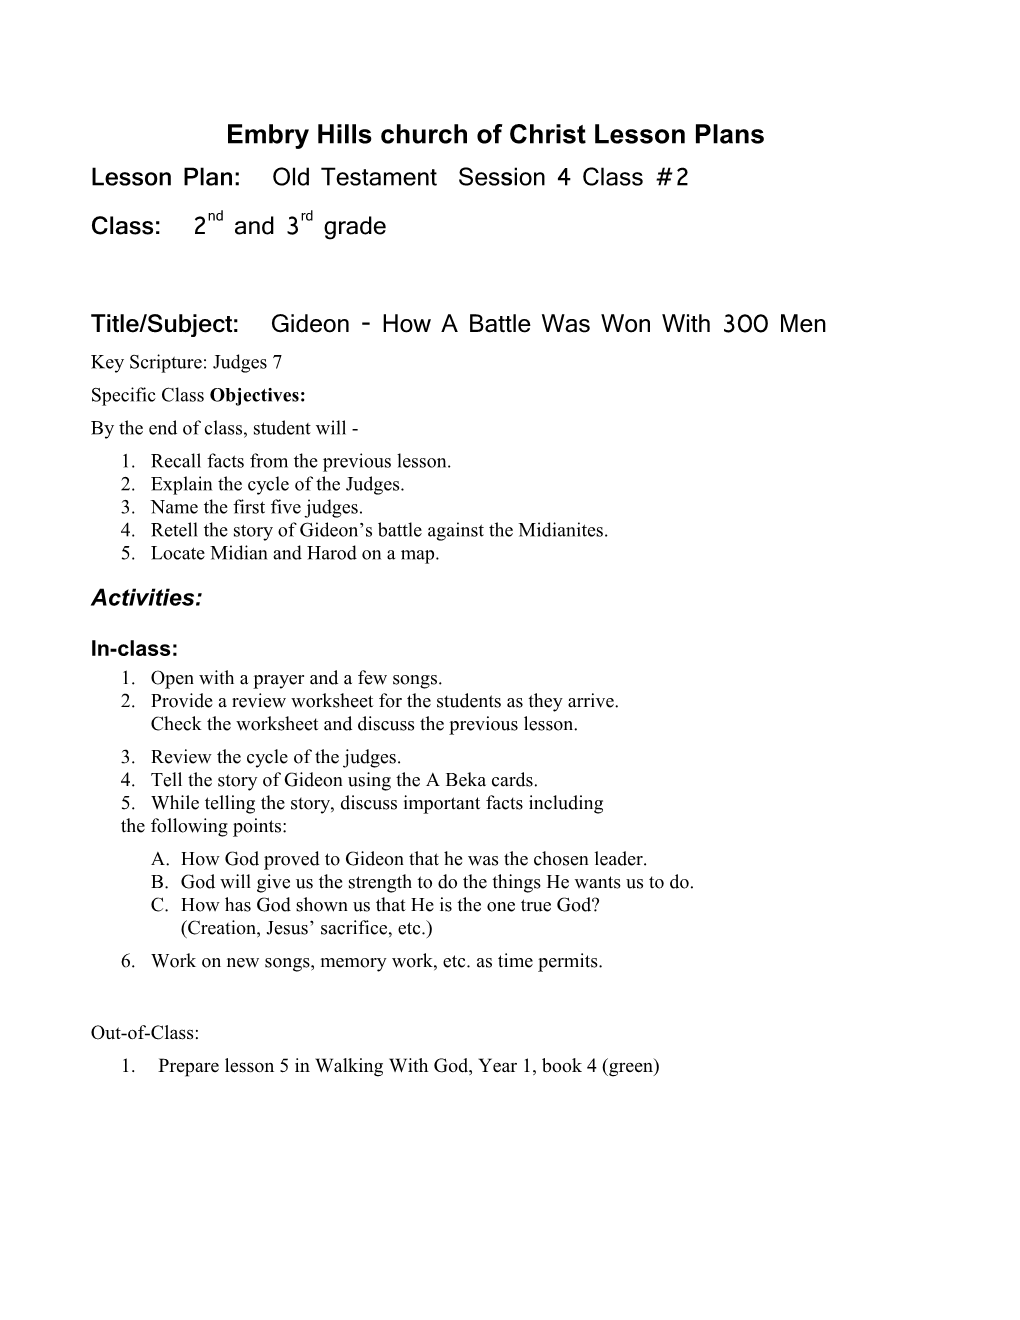 Lesson Plan: Old Testament Session 4 Class #2